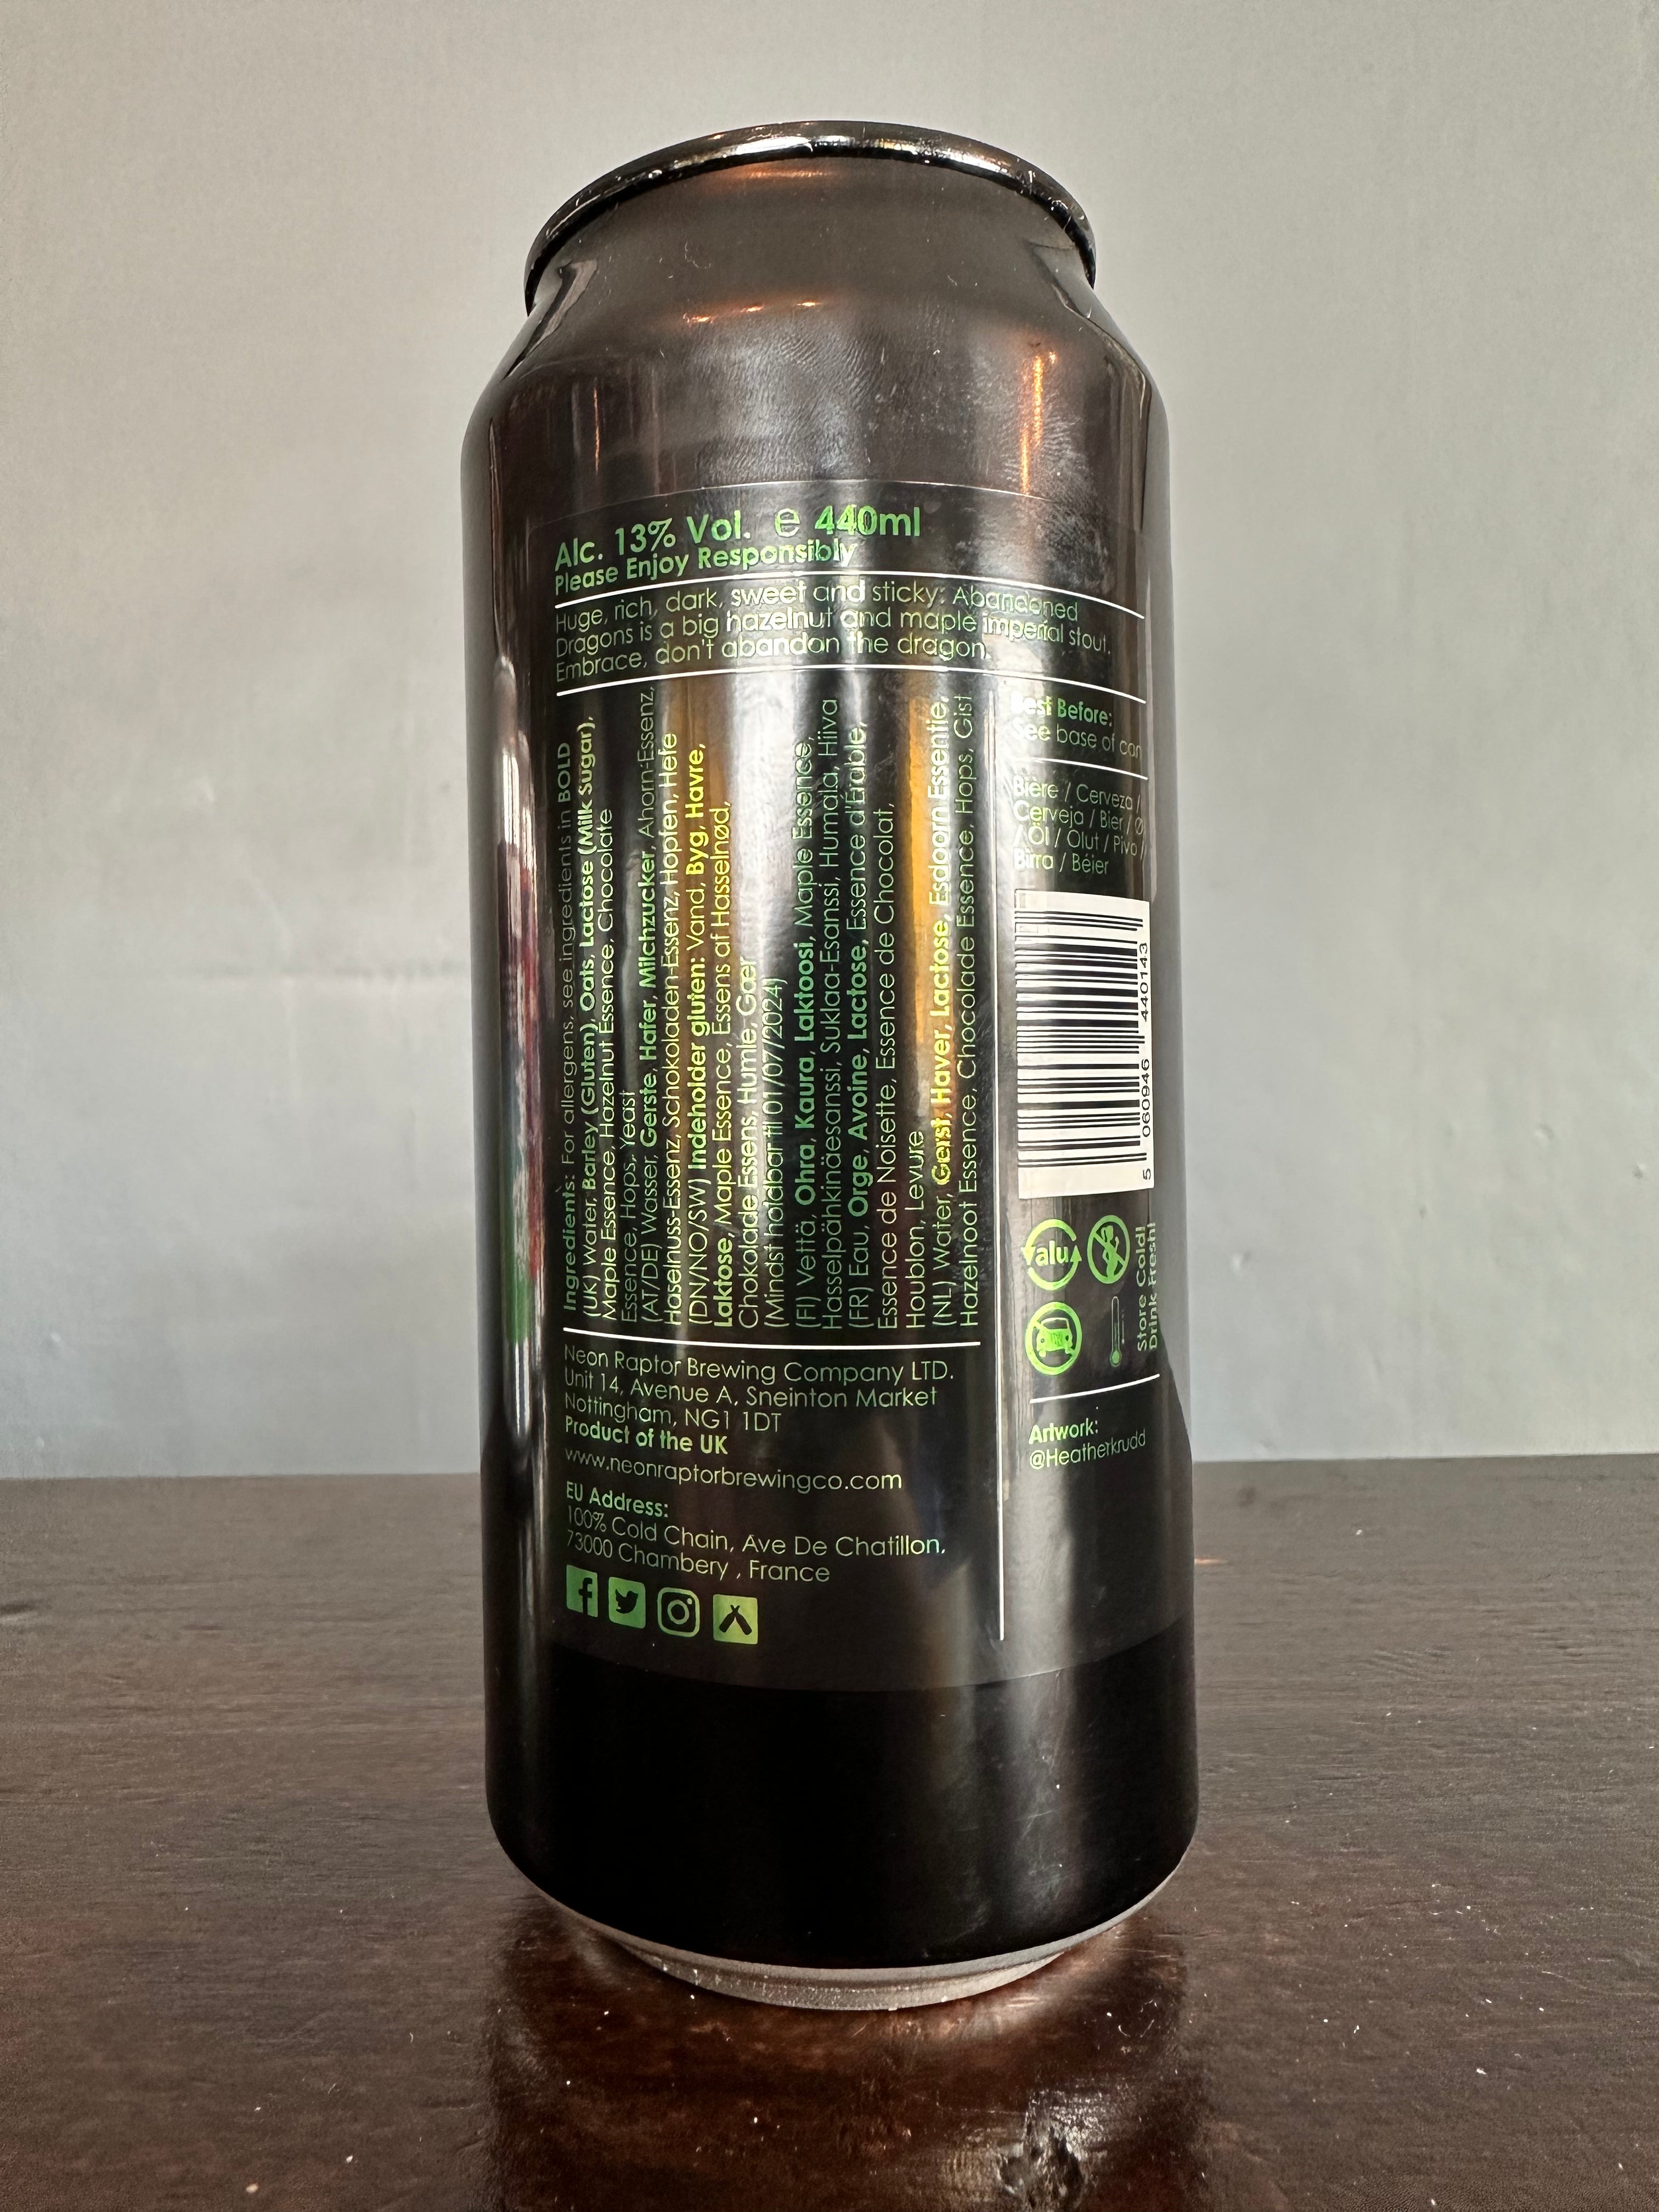 Neon Raptor Abandoned Dragons Imperial Stout 13%